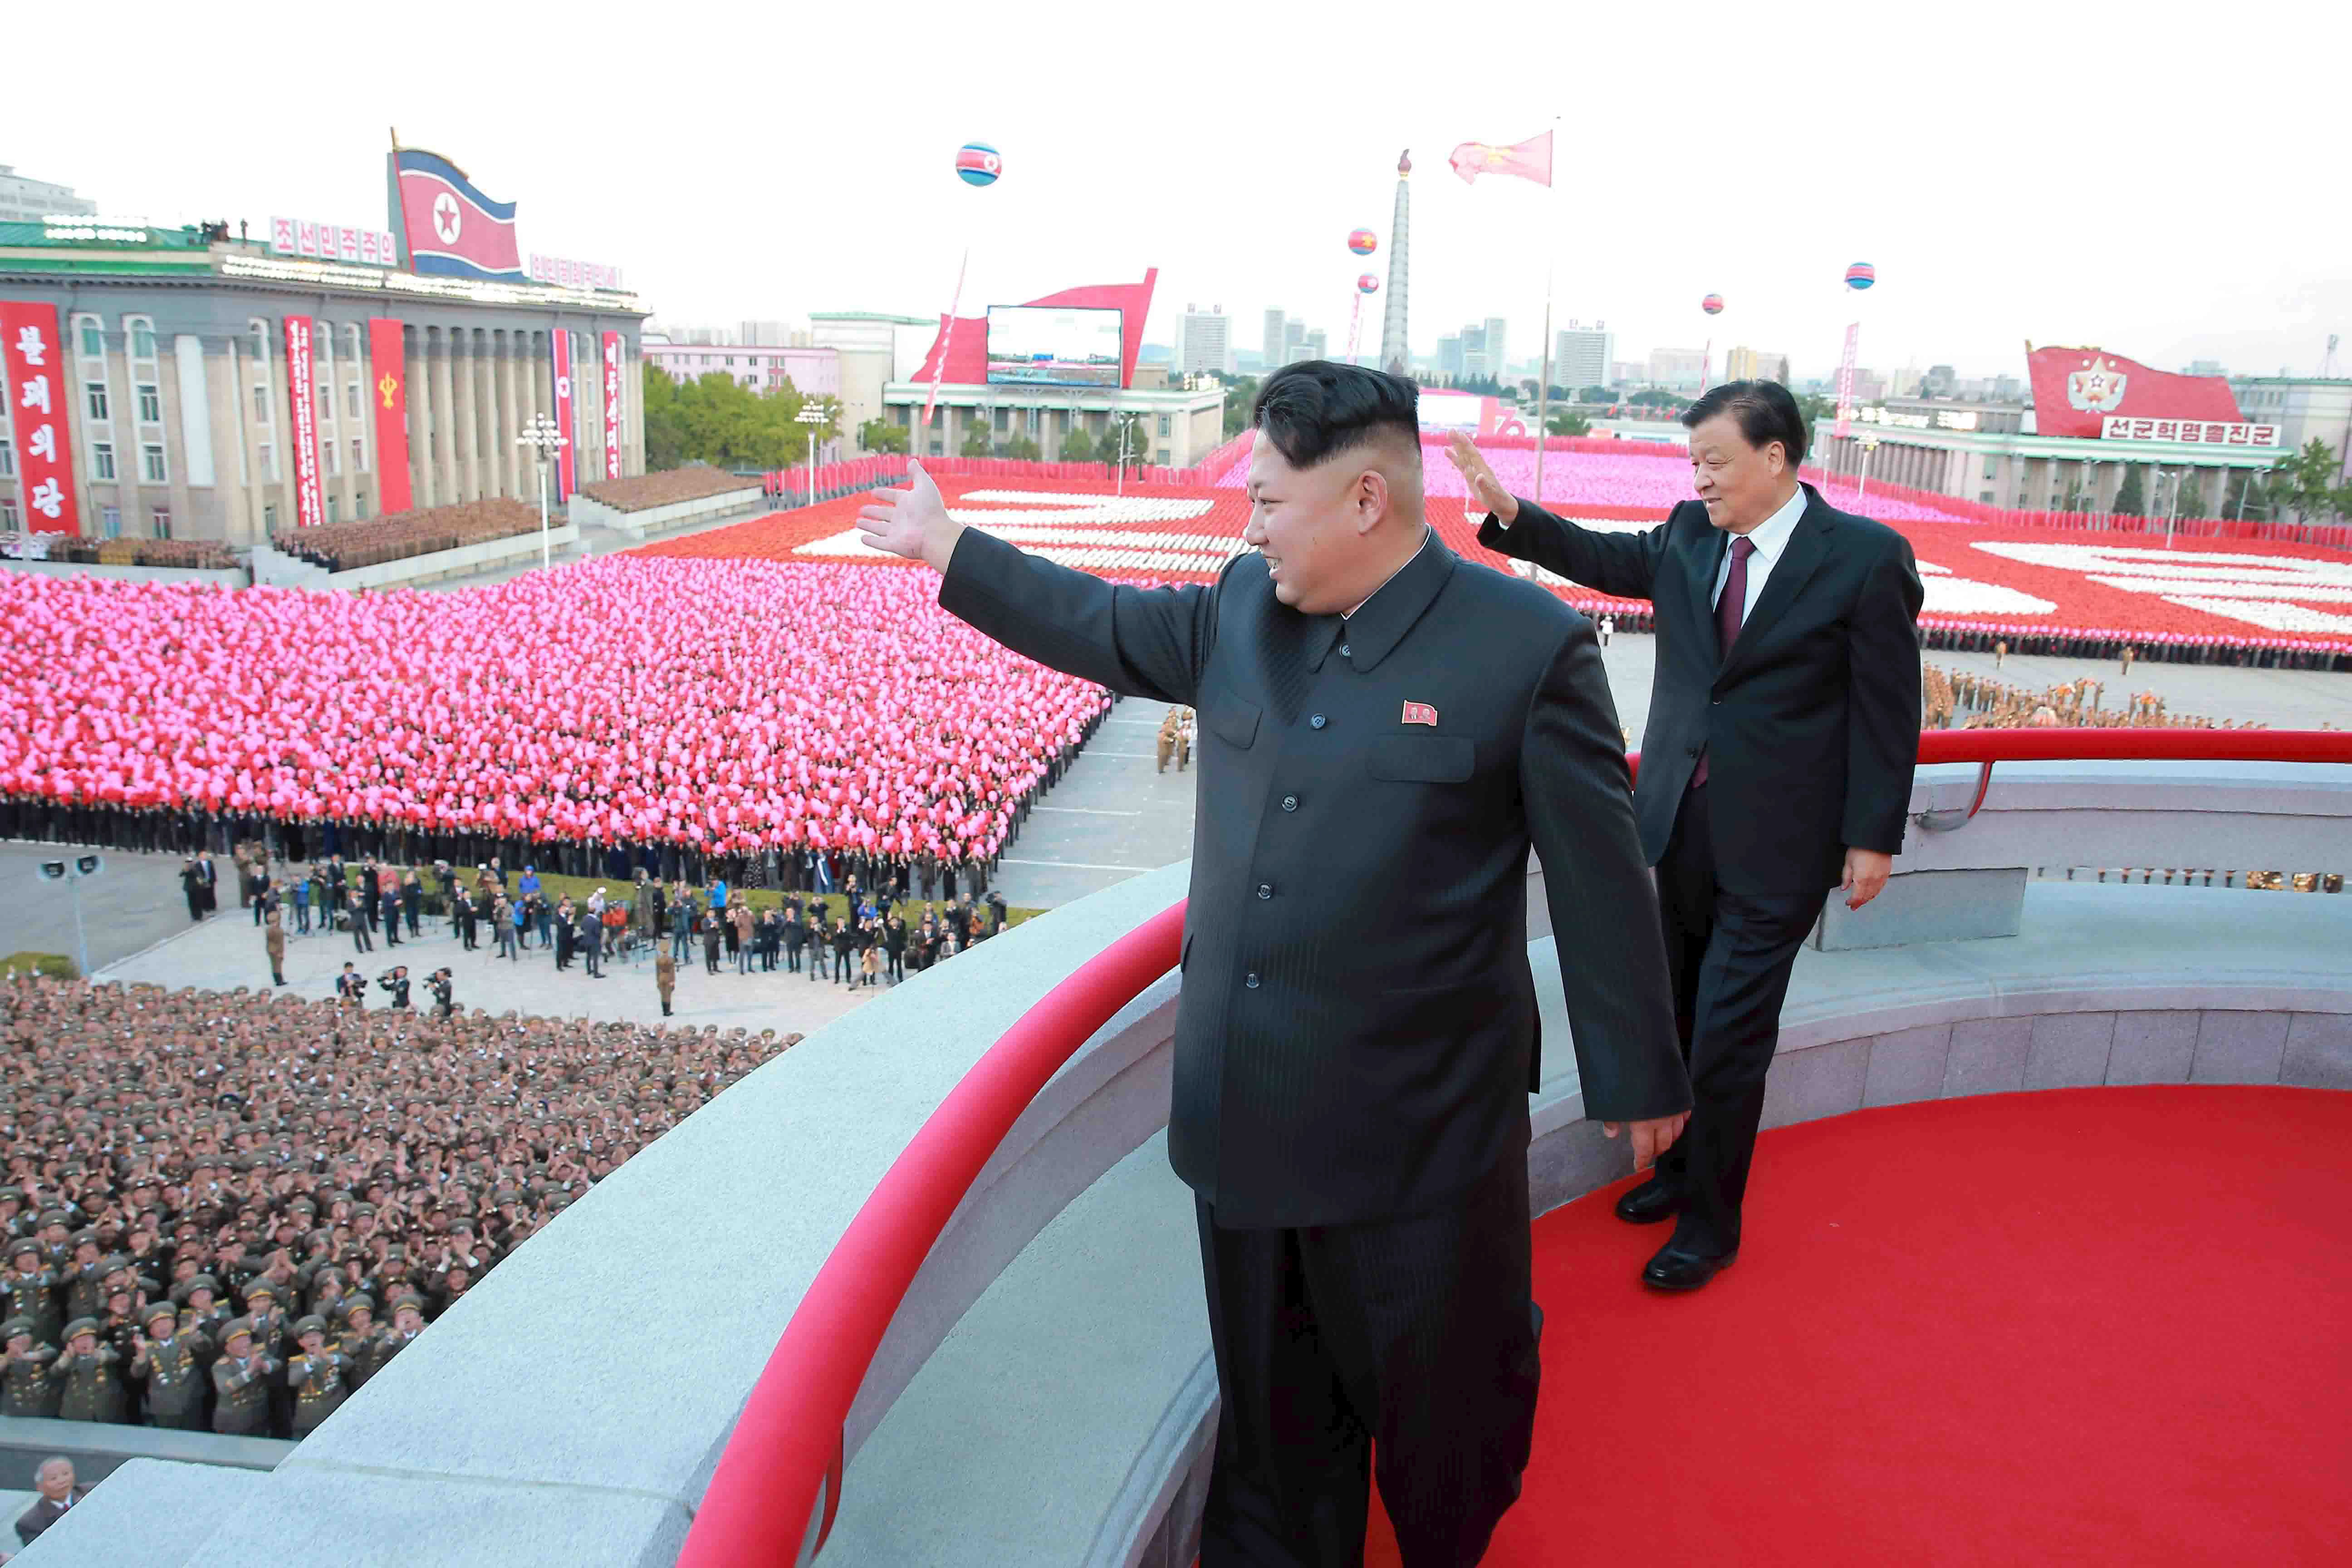 In visiting China, Kim Jong-un makes good on New Year's speech